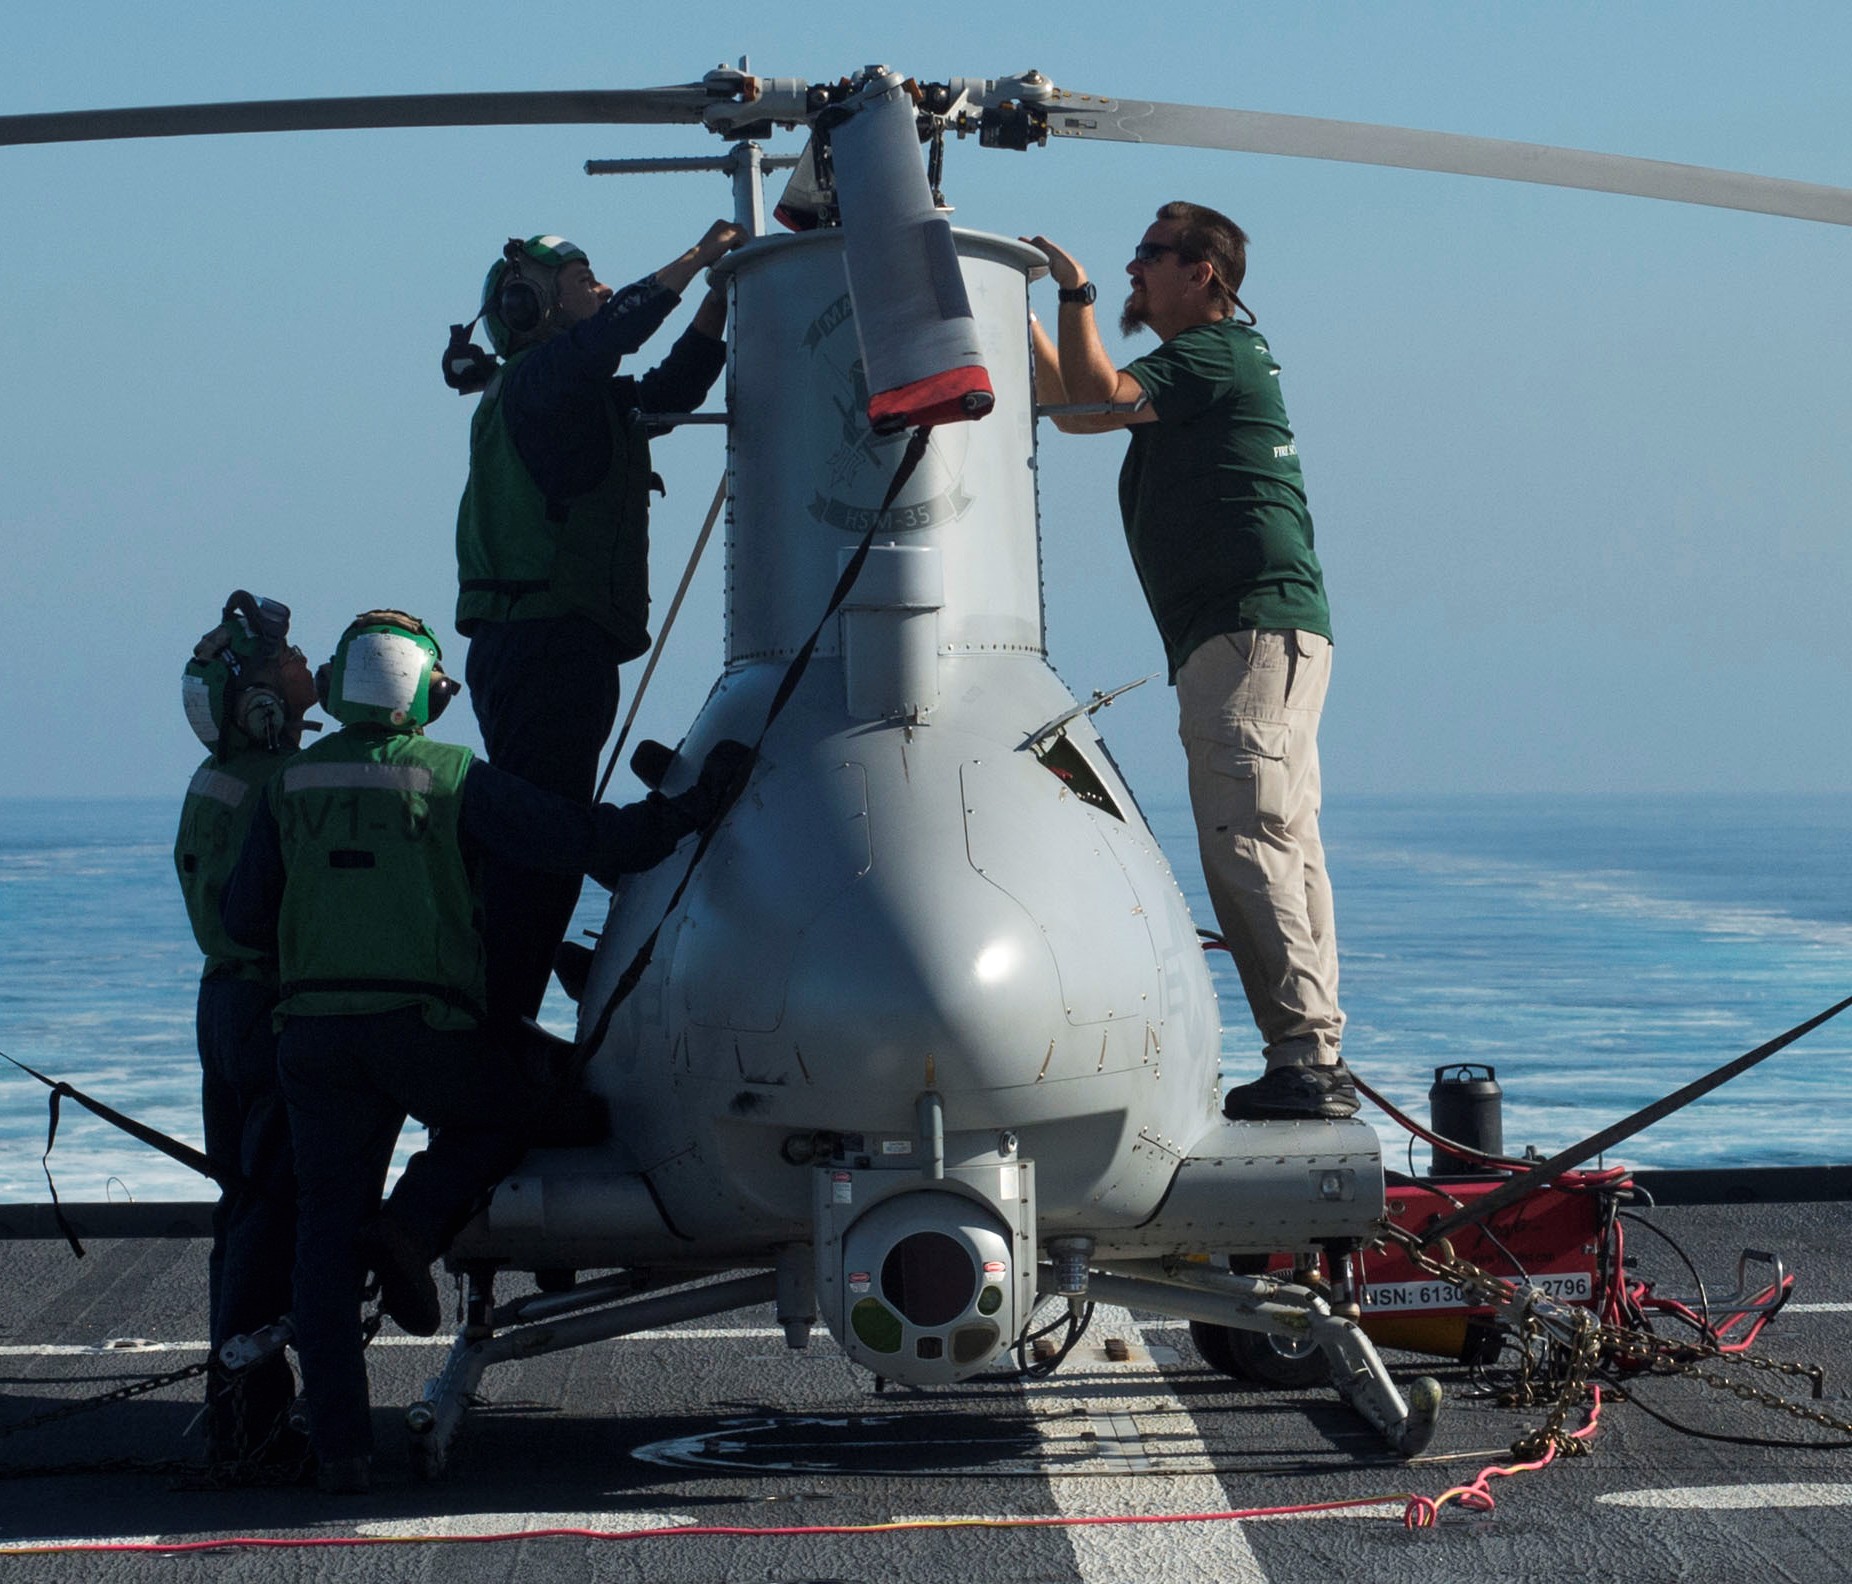 hsm-35 magicians helicopter maritime strike squadron us navy mq-8b fire scout uav 29